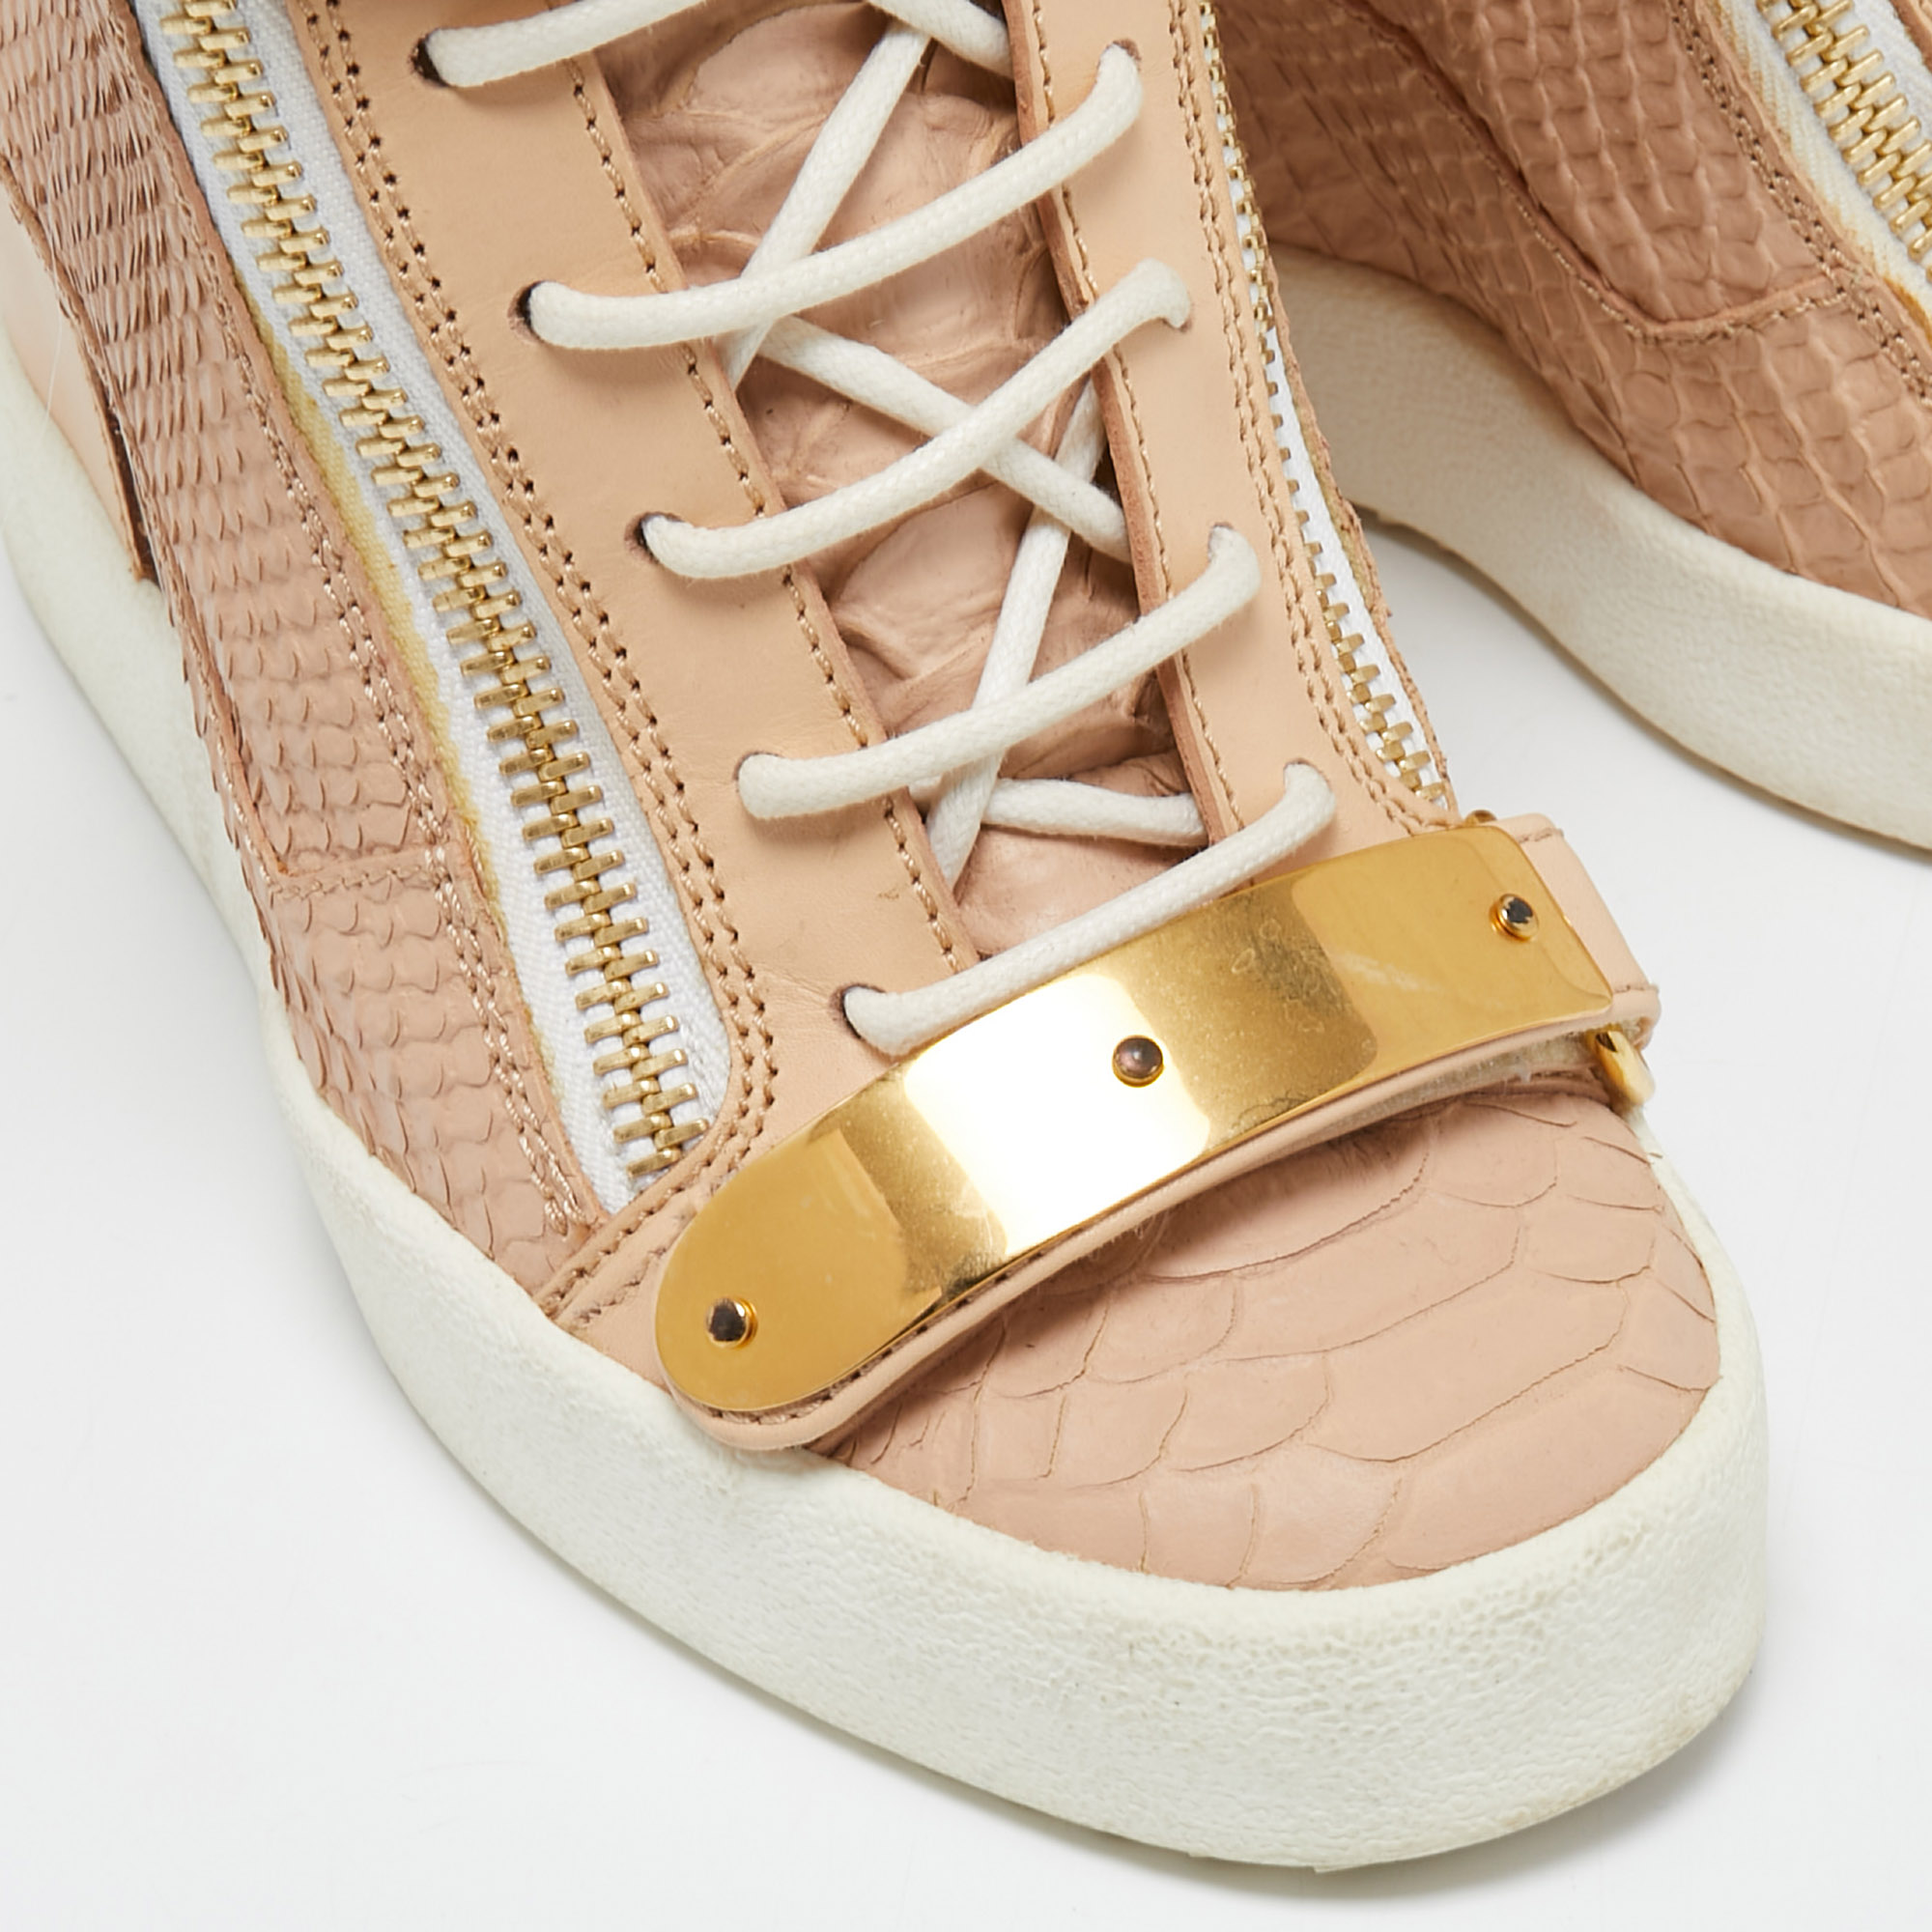 Giuseppe Zanotti Pink Python Embossed Leather Lorenz Wedge Sneakers Size 39